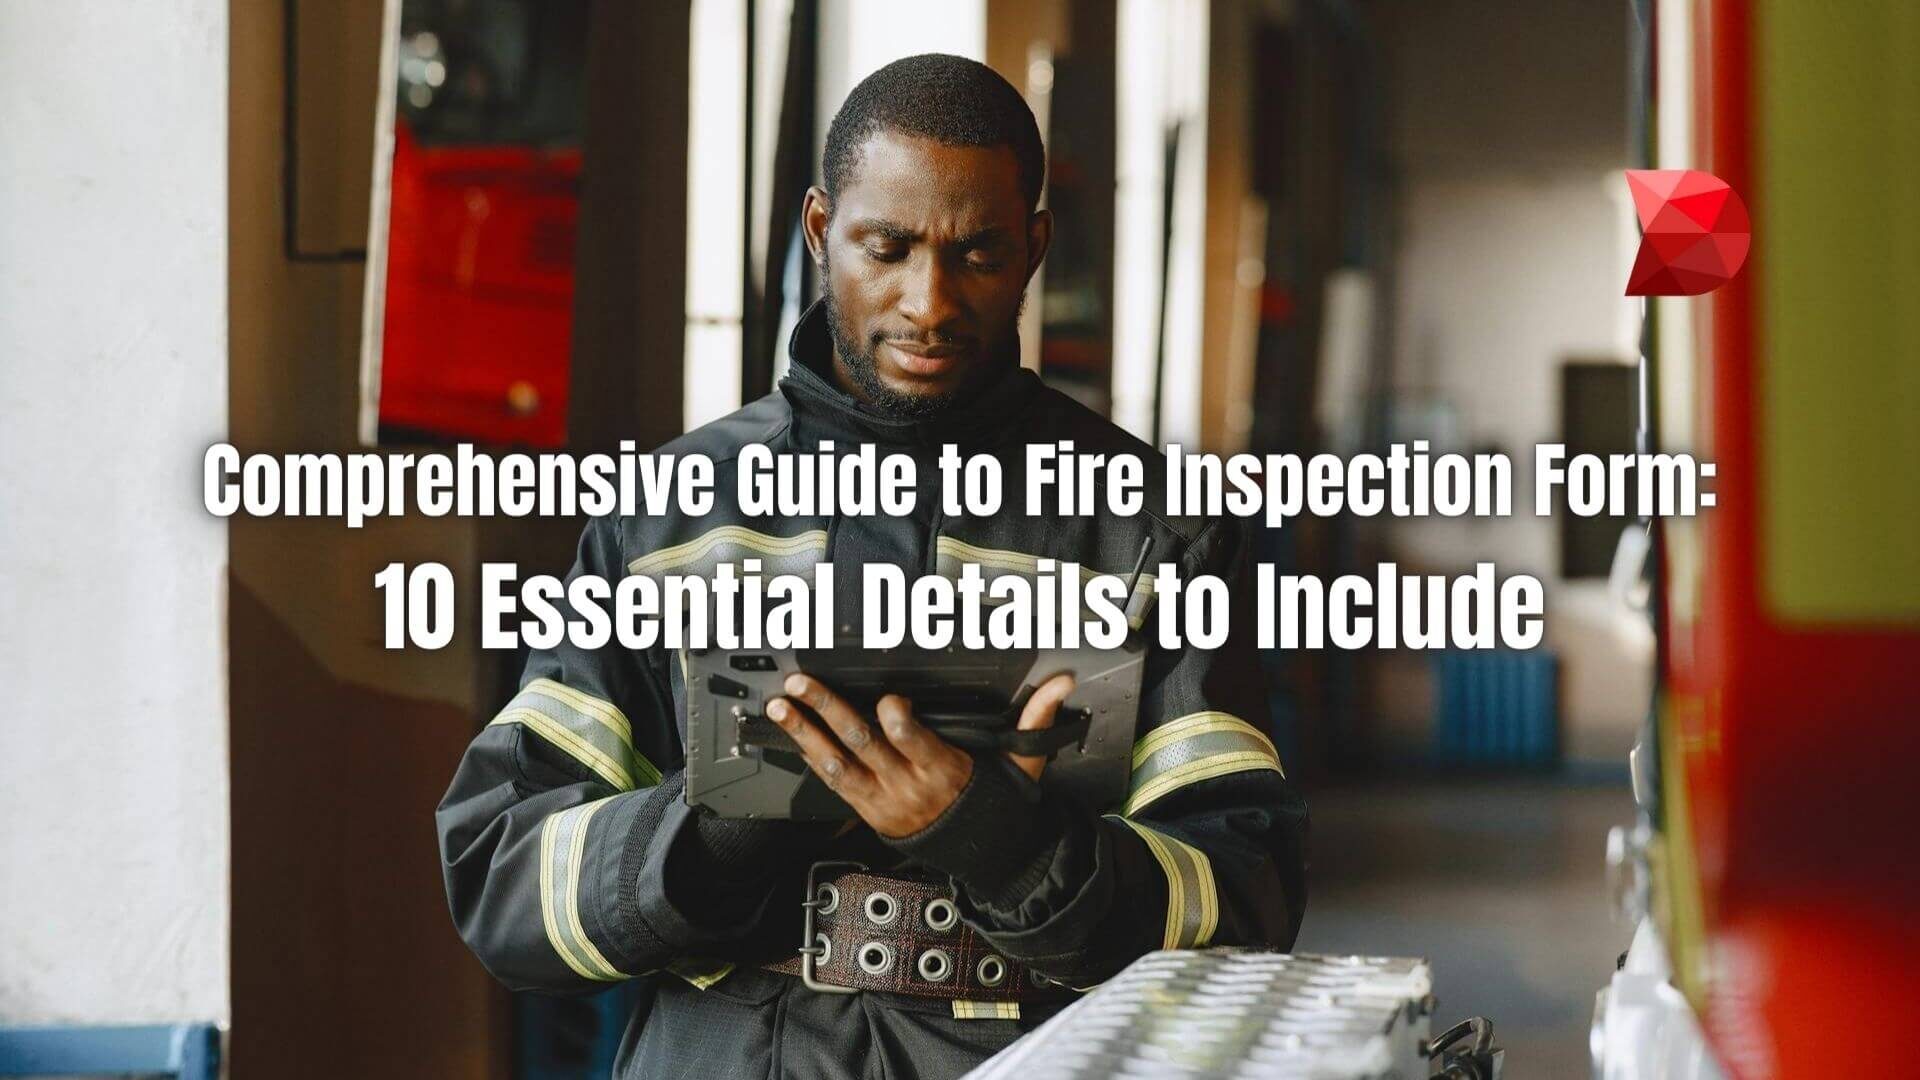 Unlock the secrets of fire inspection forms with our comprehensive guide! Learn the 10 must-have details for effective fire safety compliance.